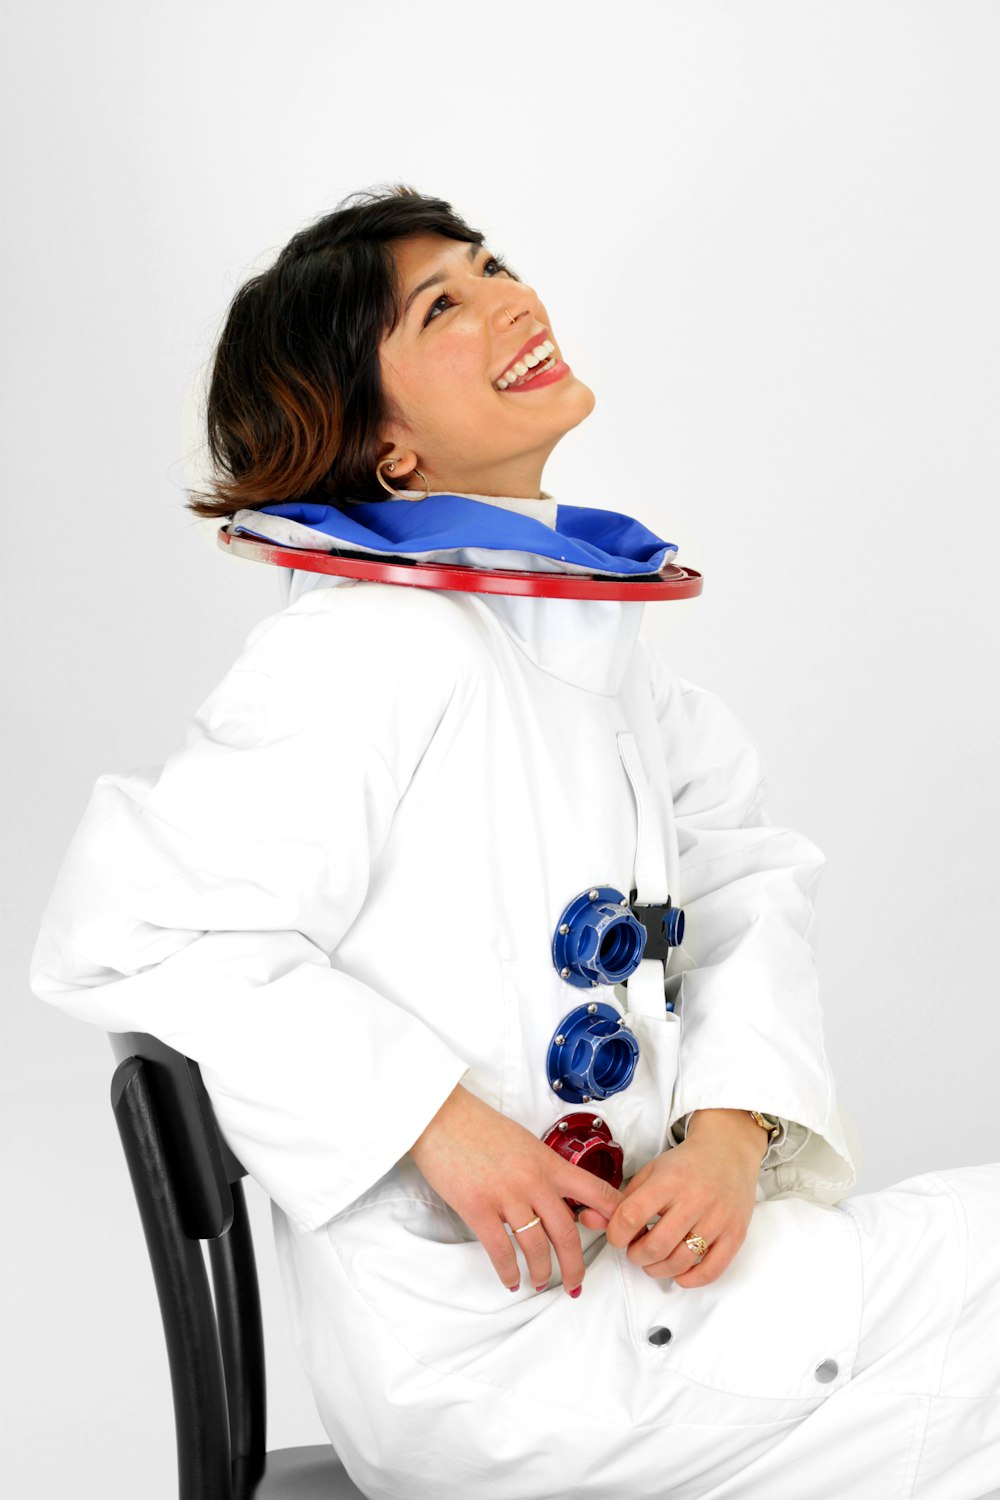 woman wearing astronaut suit smiling while sitting on chair and looking up